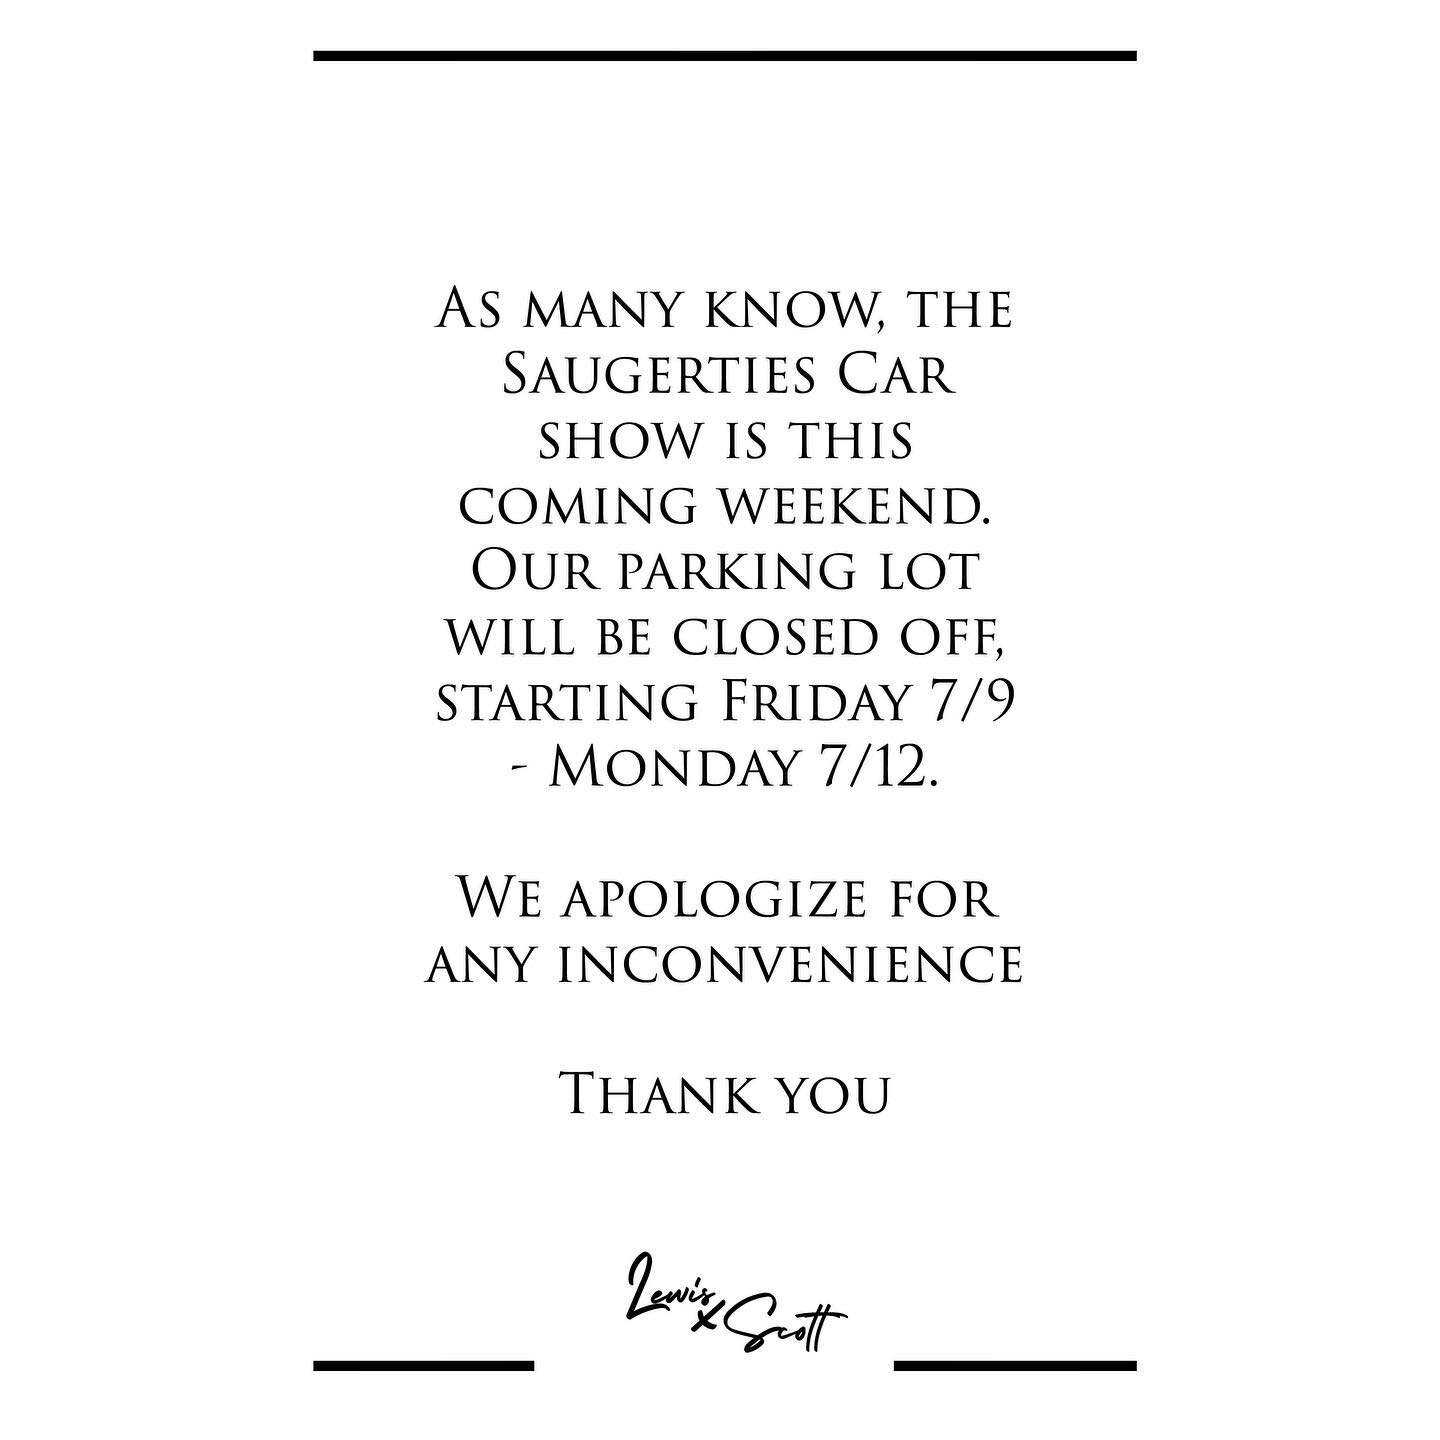 Sorry for any inconvenience!